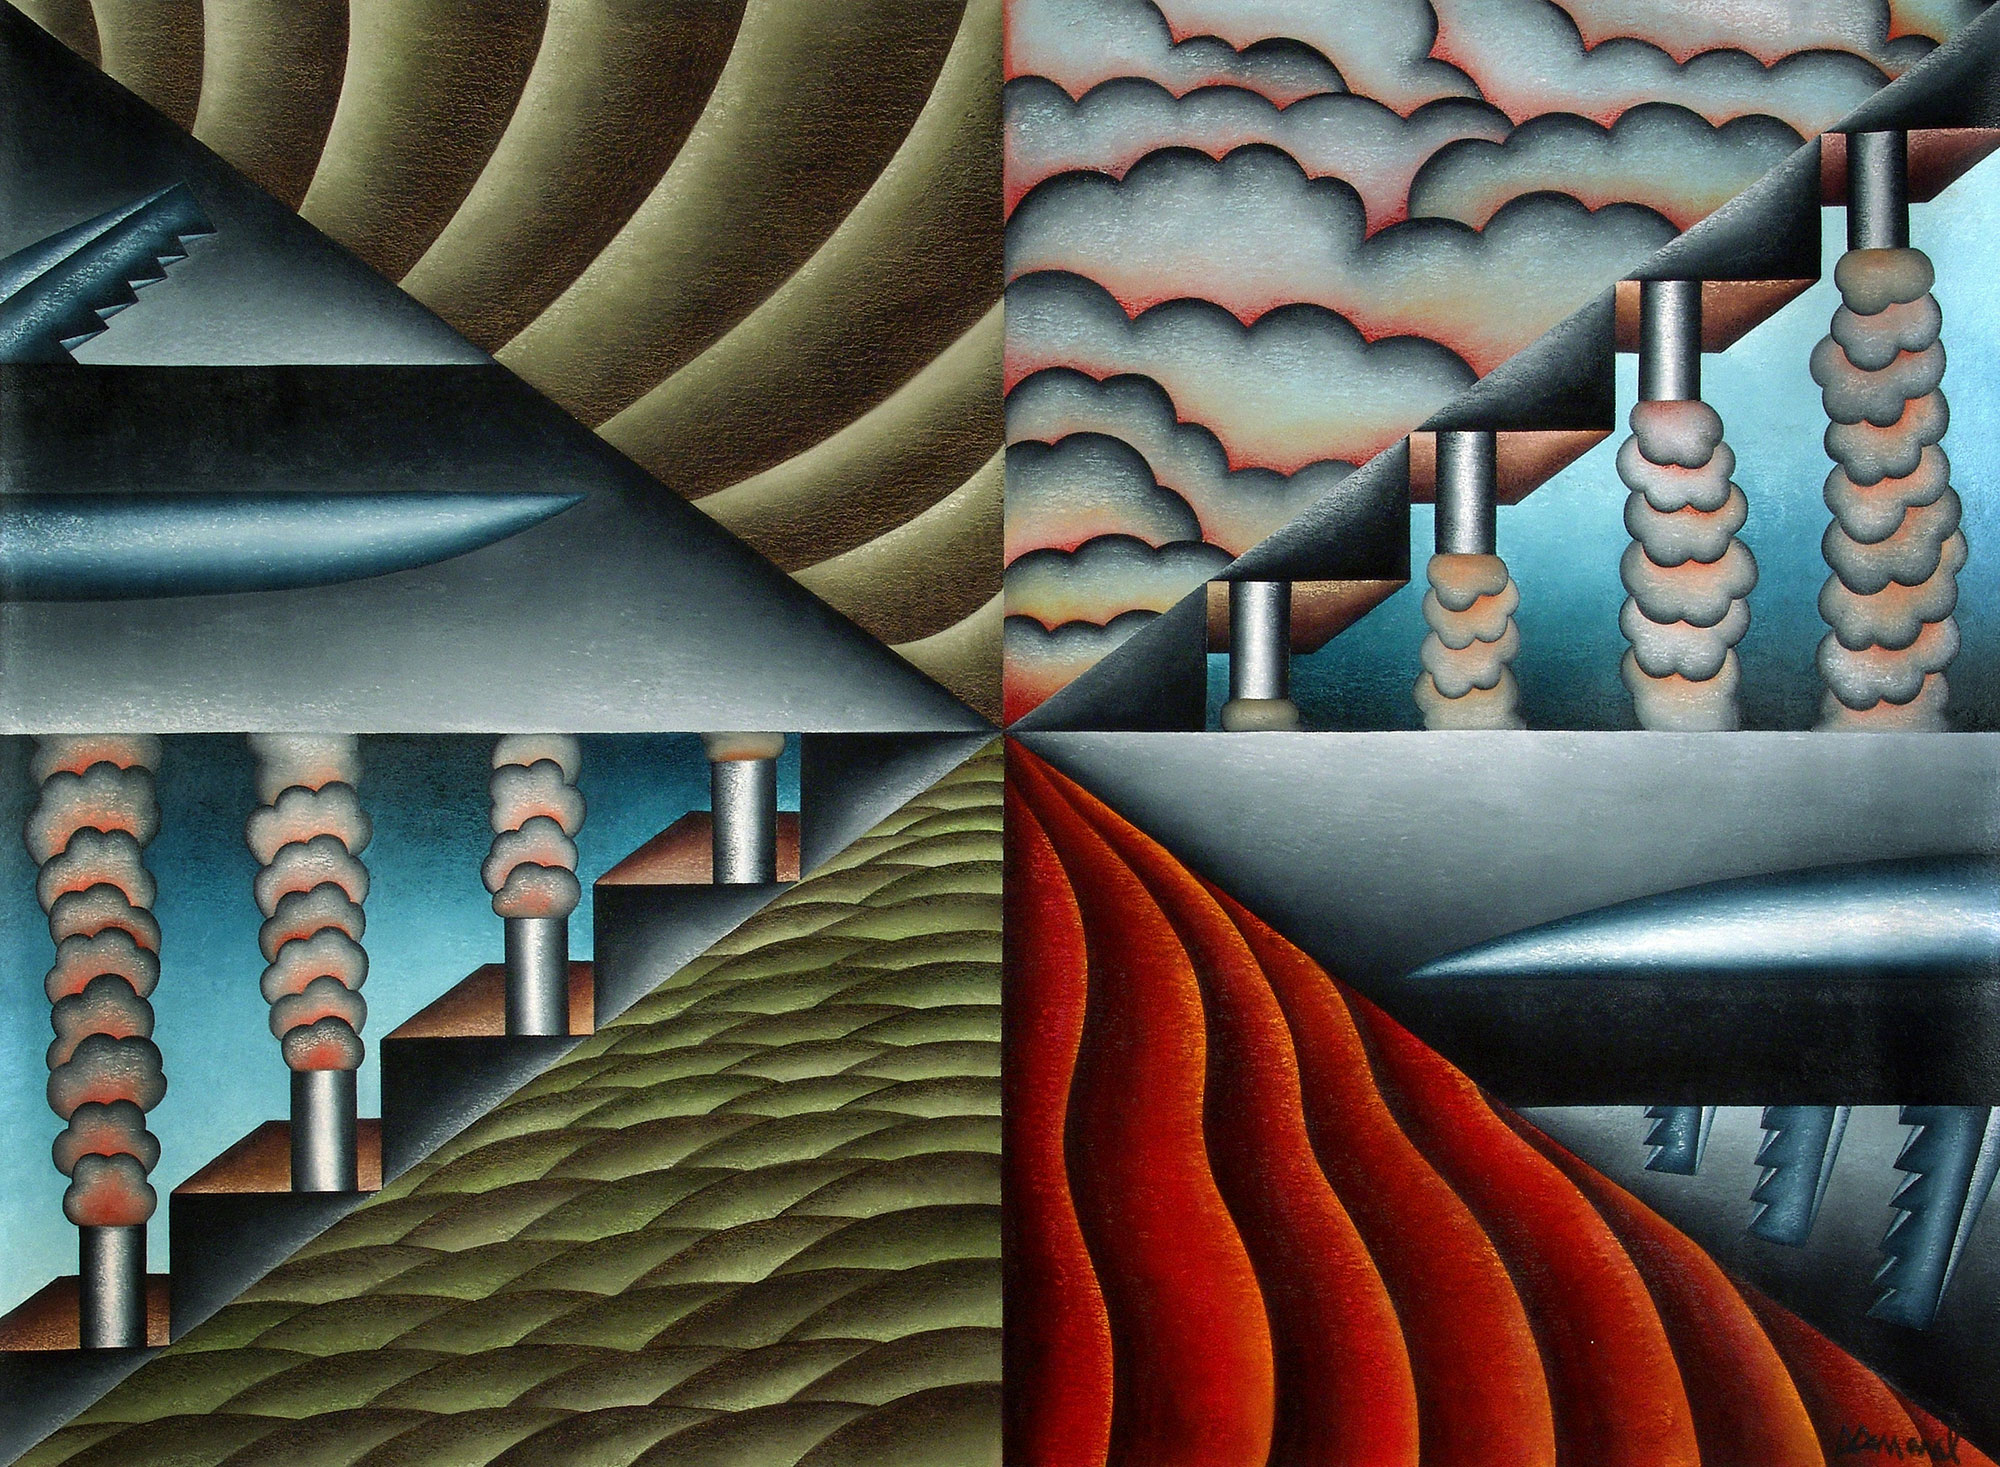 Antonio Henrique Amaral, Antagonic Fields or Fields of Opposites, 72 x 97 inches, 1992, Oil on Canvas